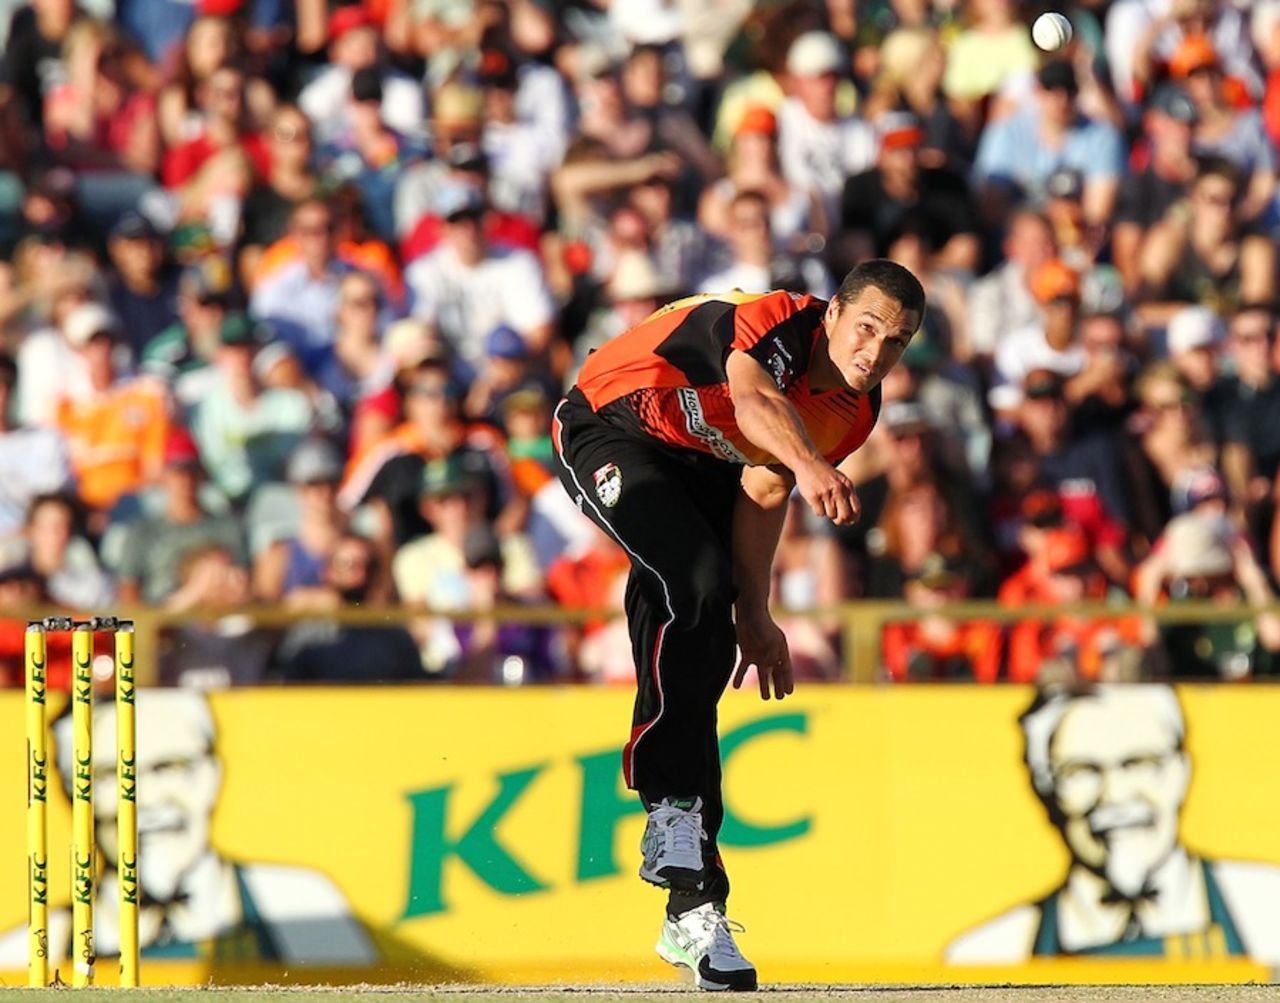 Nathan-Coulter Nile in action, Big Bash League, Perth Scorchers v Hobart Hurricanes, Perth, January 7, 2014